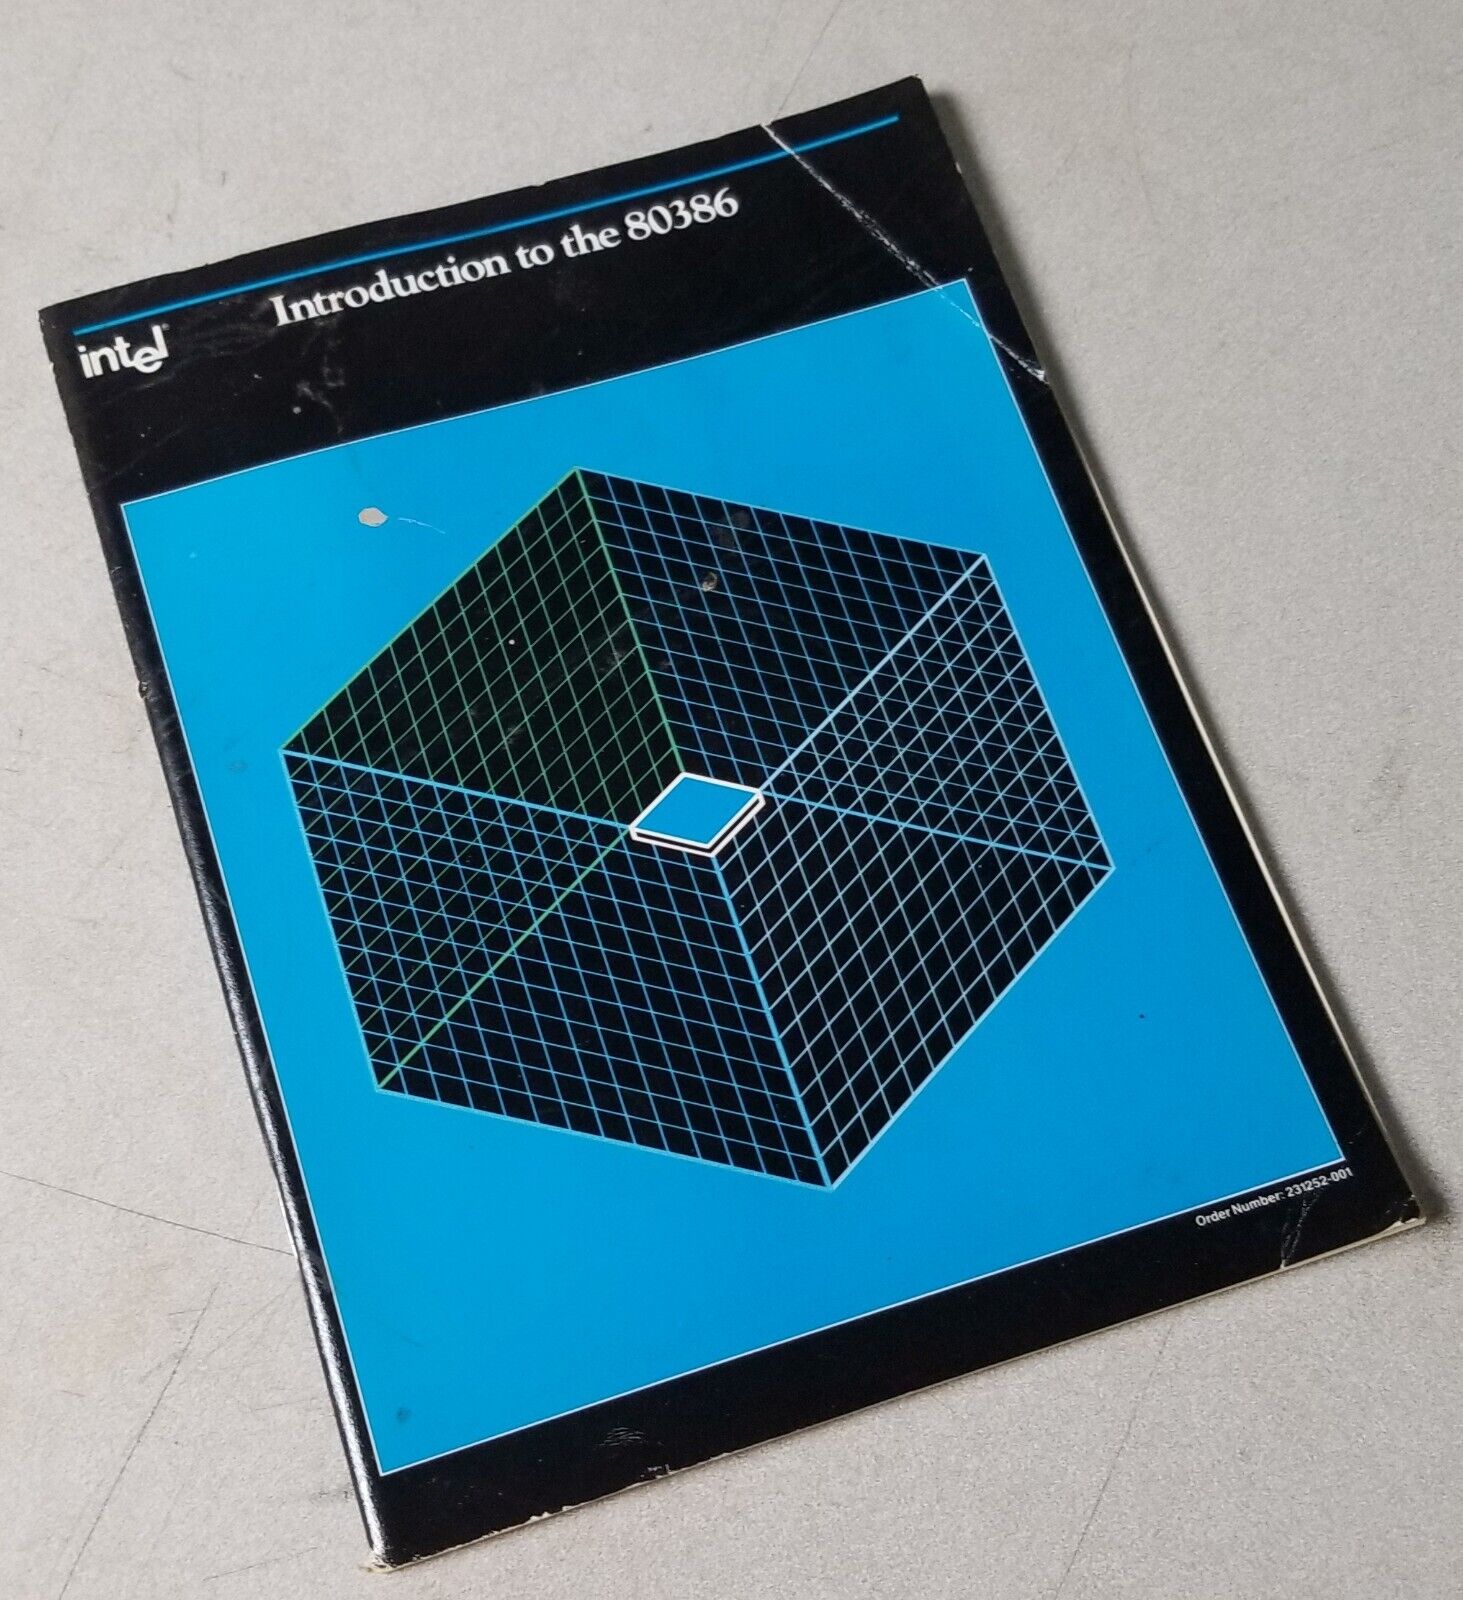 Original Intel Introduction to the 80386 Microprocessor